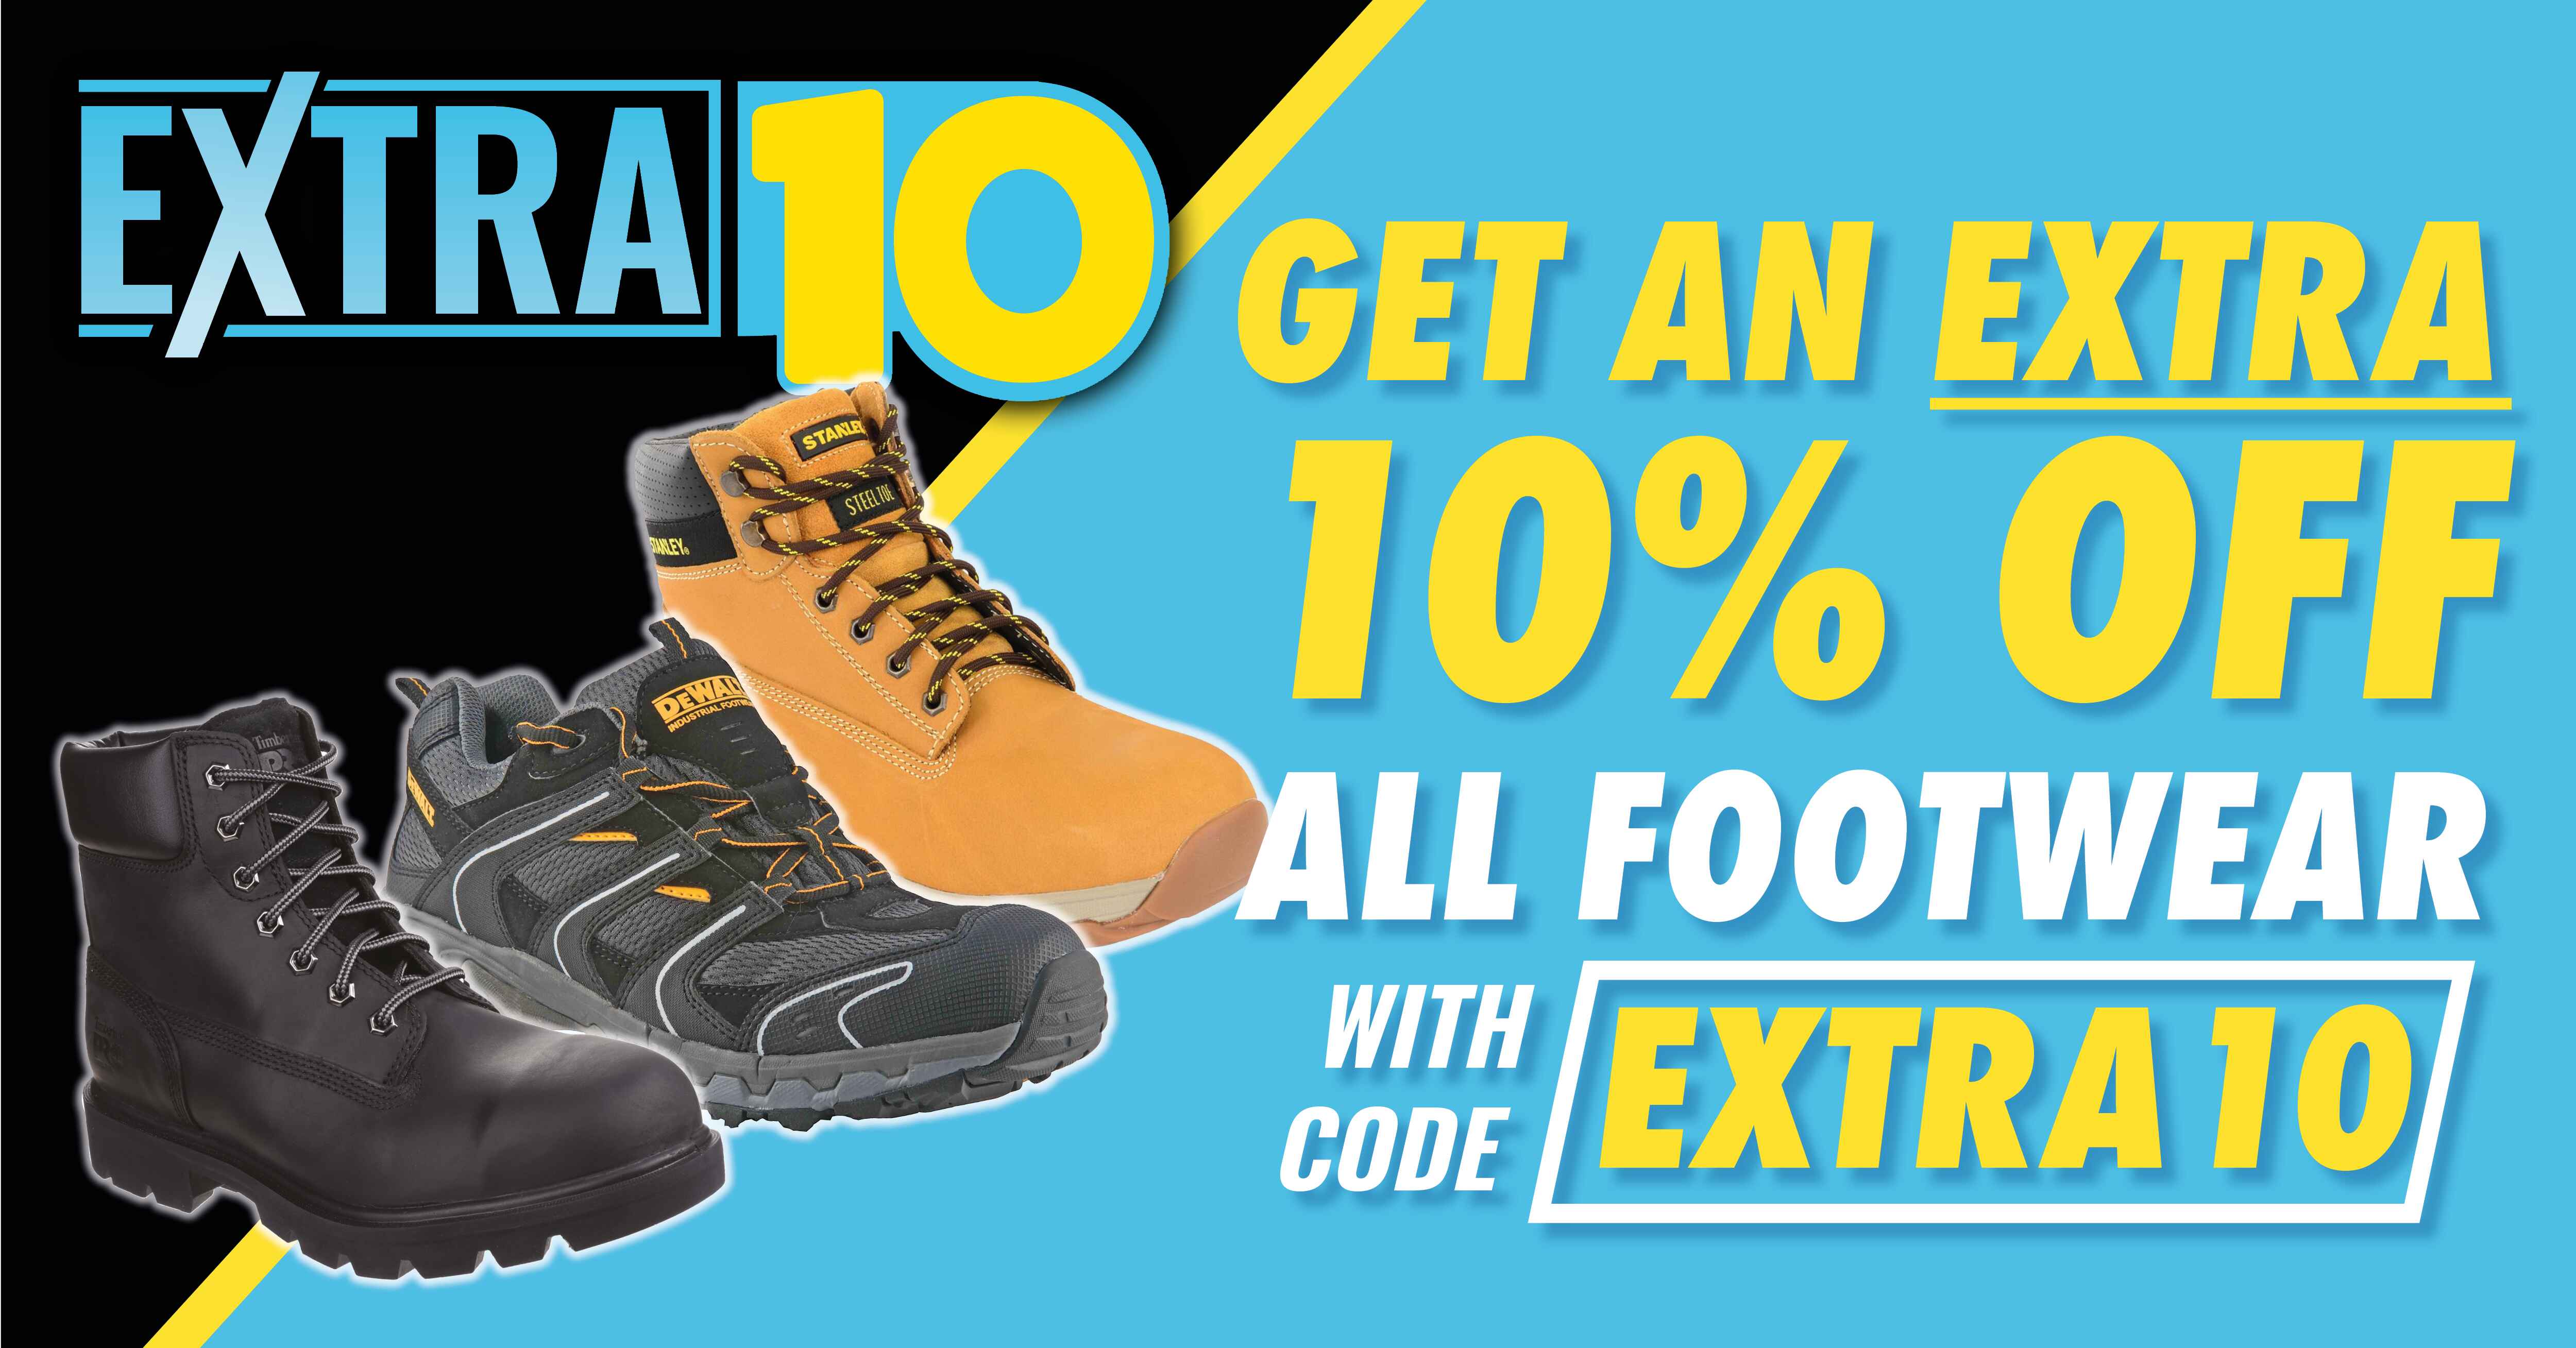 Extra 10% off on Footwear